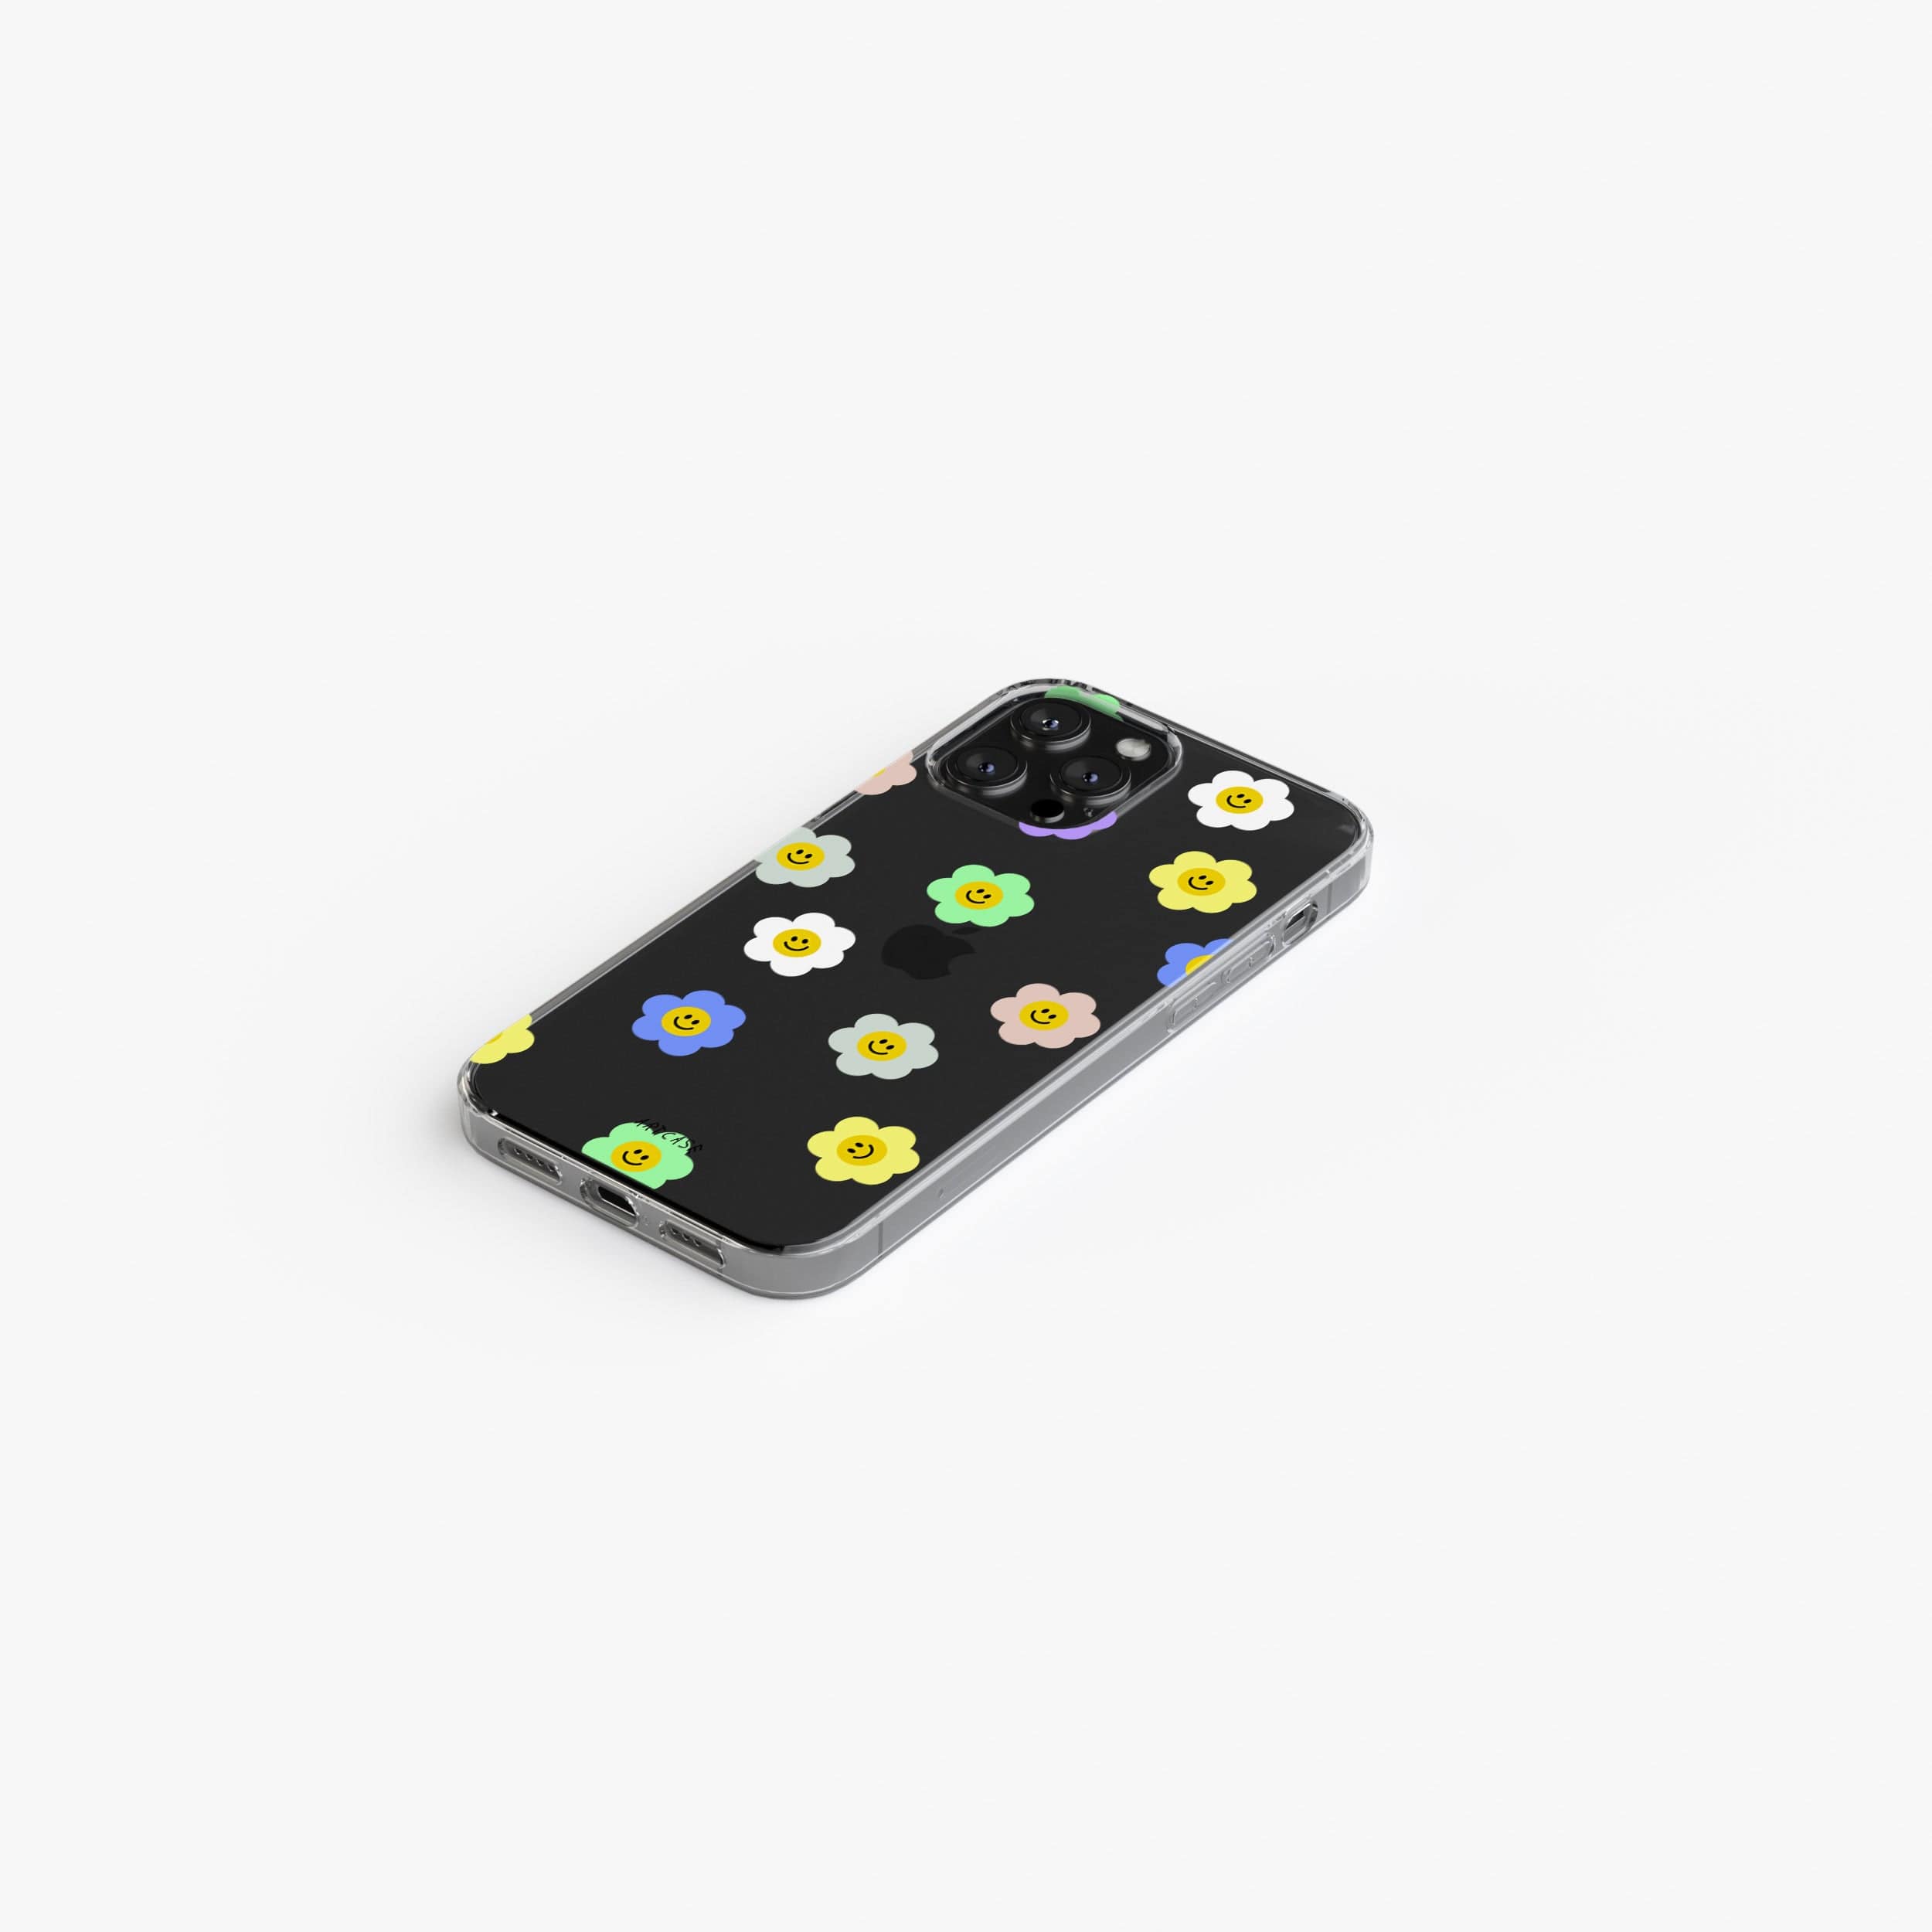 Transparent silicone case "Daisy with emoticons"